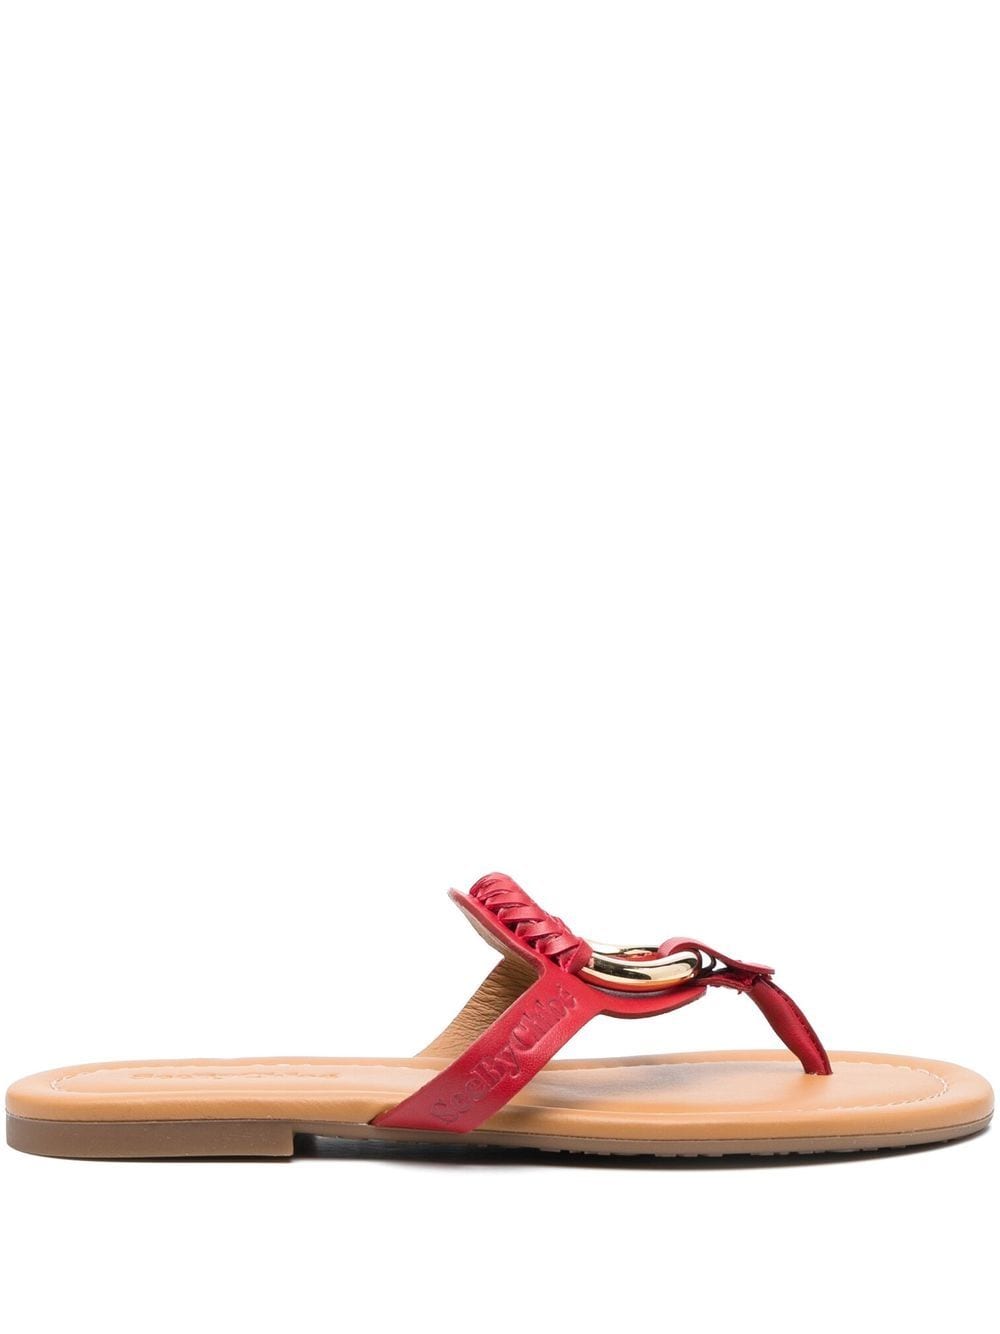 See by Chloé leather thong sandals - Red von See by Chloé